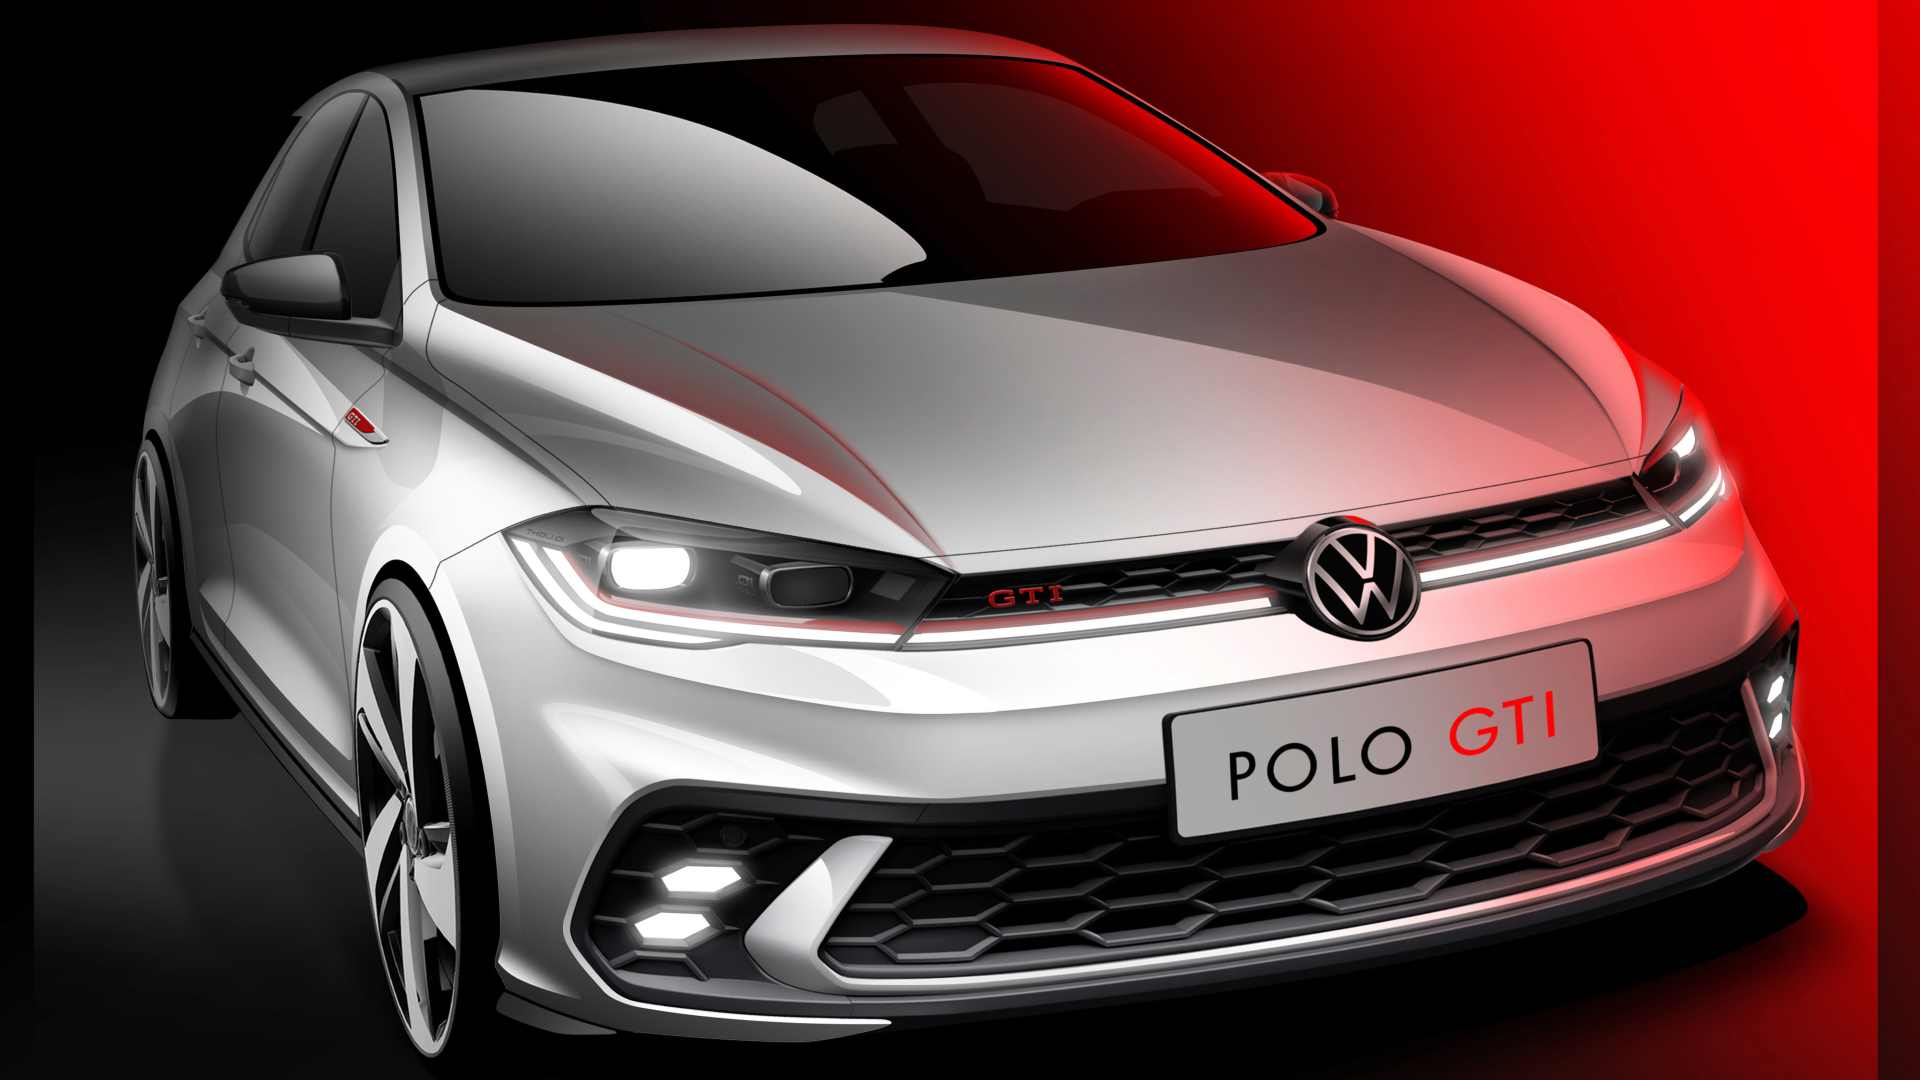 This is the first major update for the current-gen Volkswagen Polo GTI since its debut in 2018. Image: Volkswagen